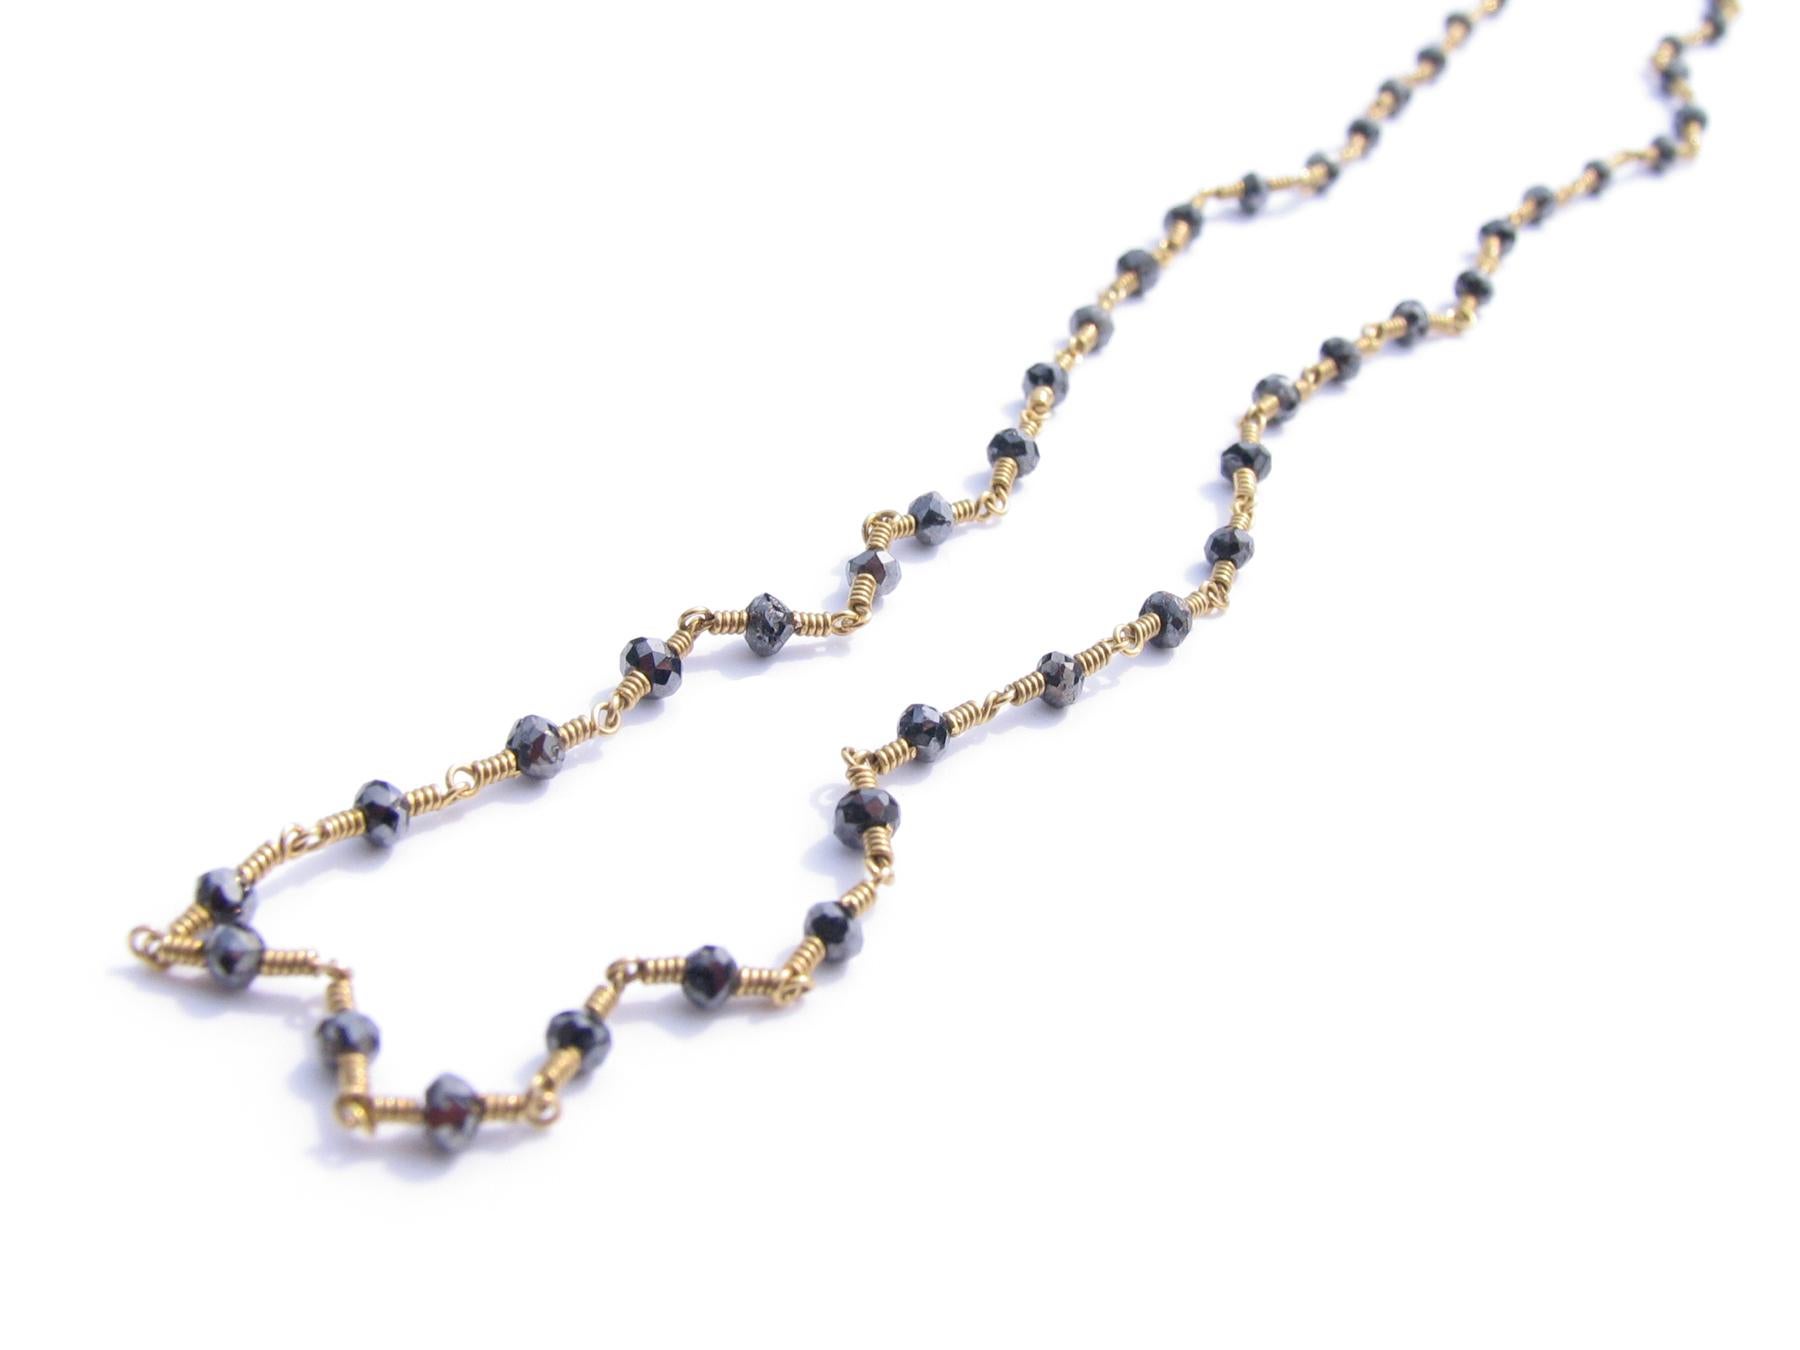 18K Gold black diamond bead necklace by Christopher Phelan Fine Jewelry.
Diamond weight 5.4 carats. Approximate size of diamonds is from 2.5 mm to 2 mm.
Length of necklace 18 inches.



